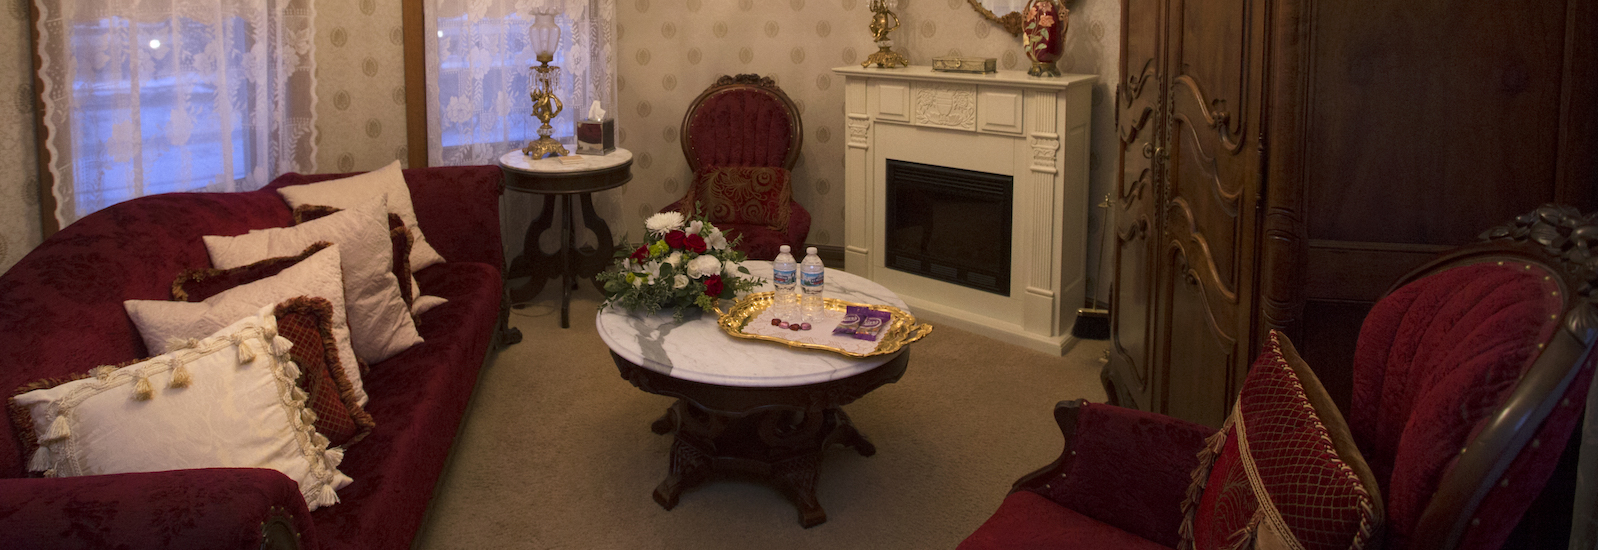 A sitting area in one of the rooms at the Ginkgo Tree Inn Bed & Breakfast in Mt. Pleasant, Michigan.